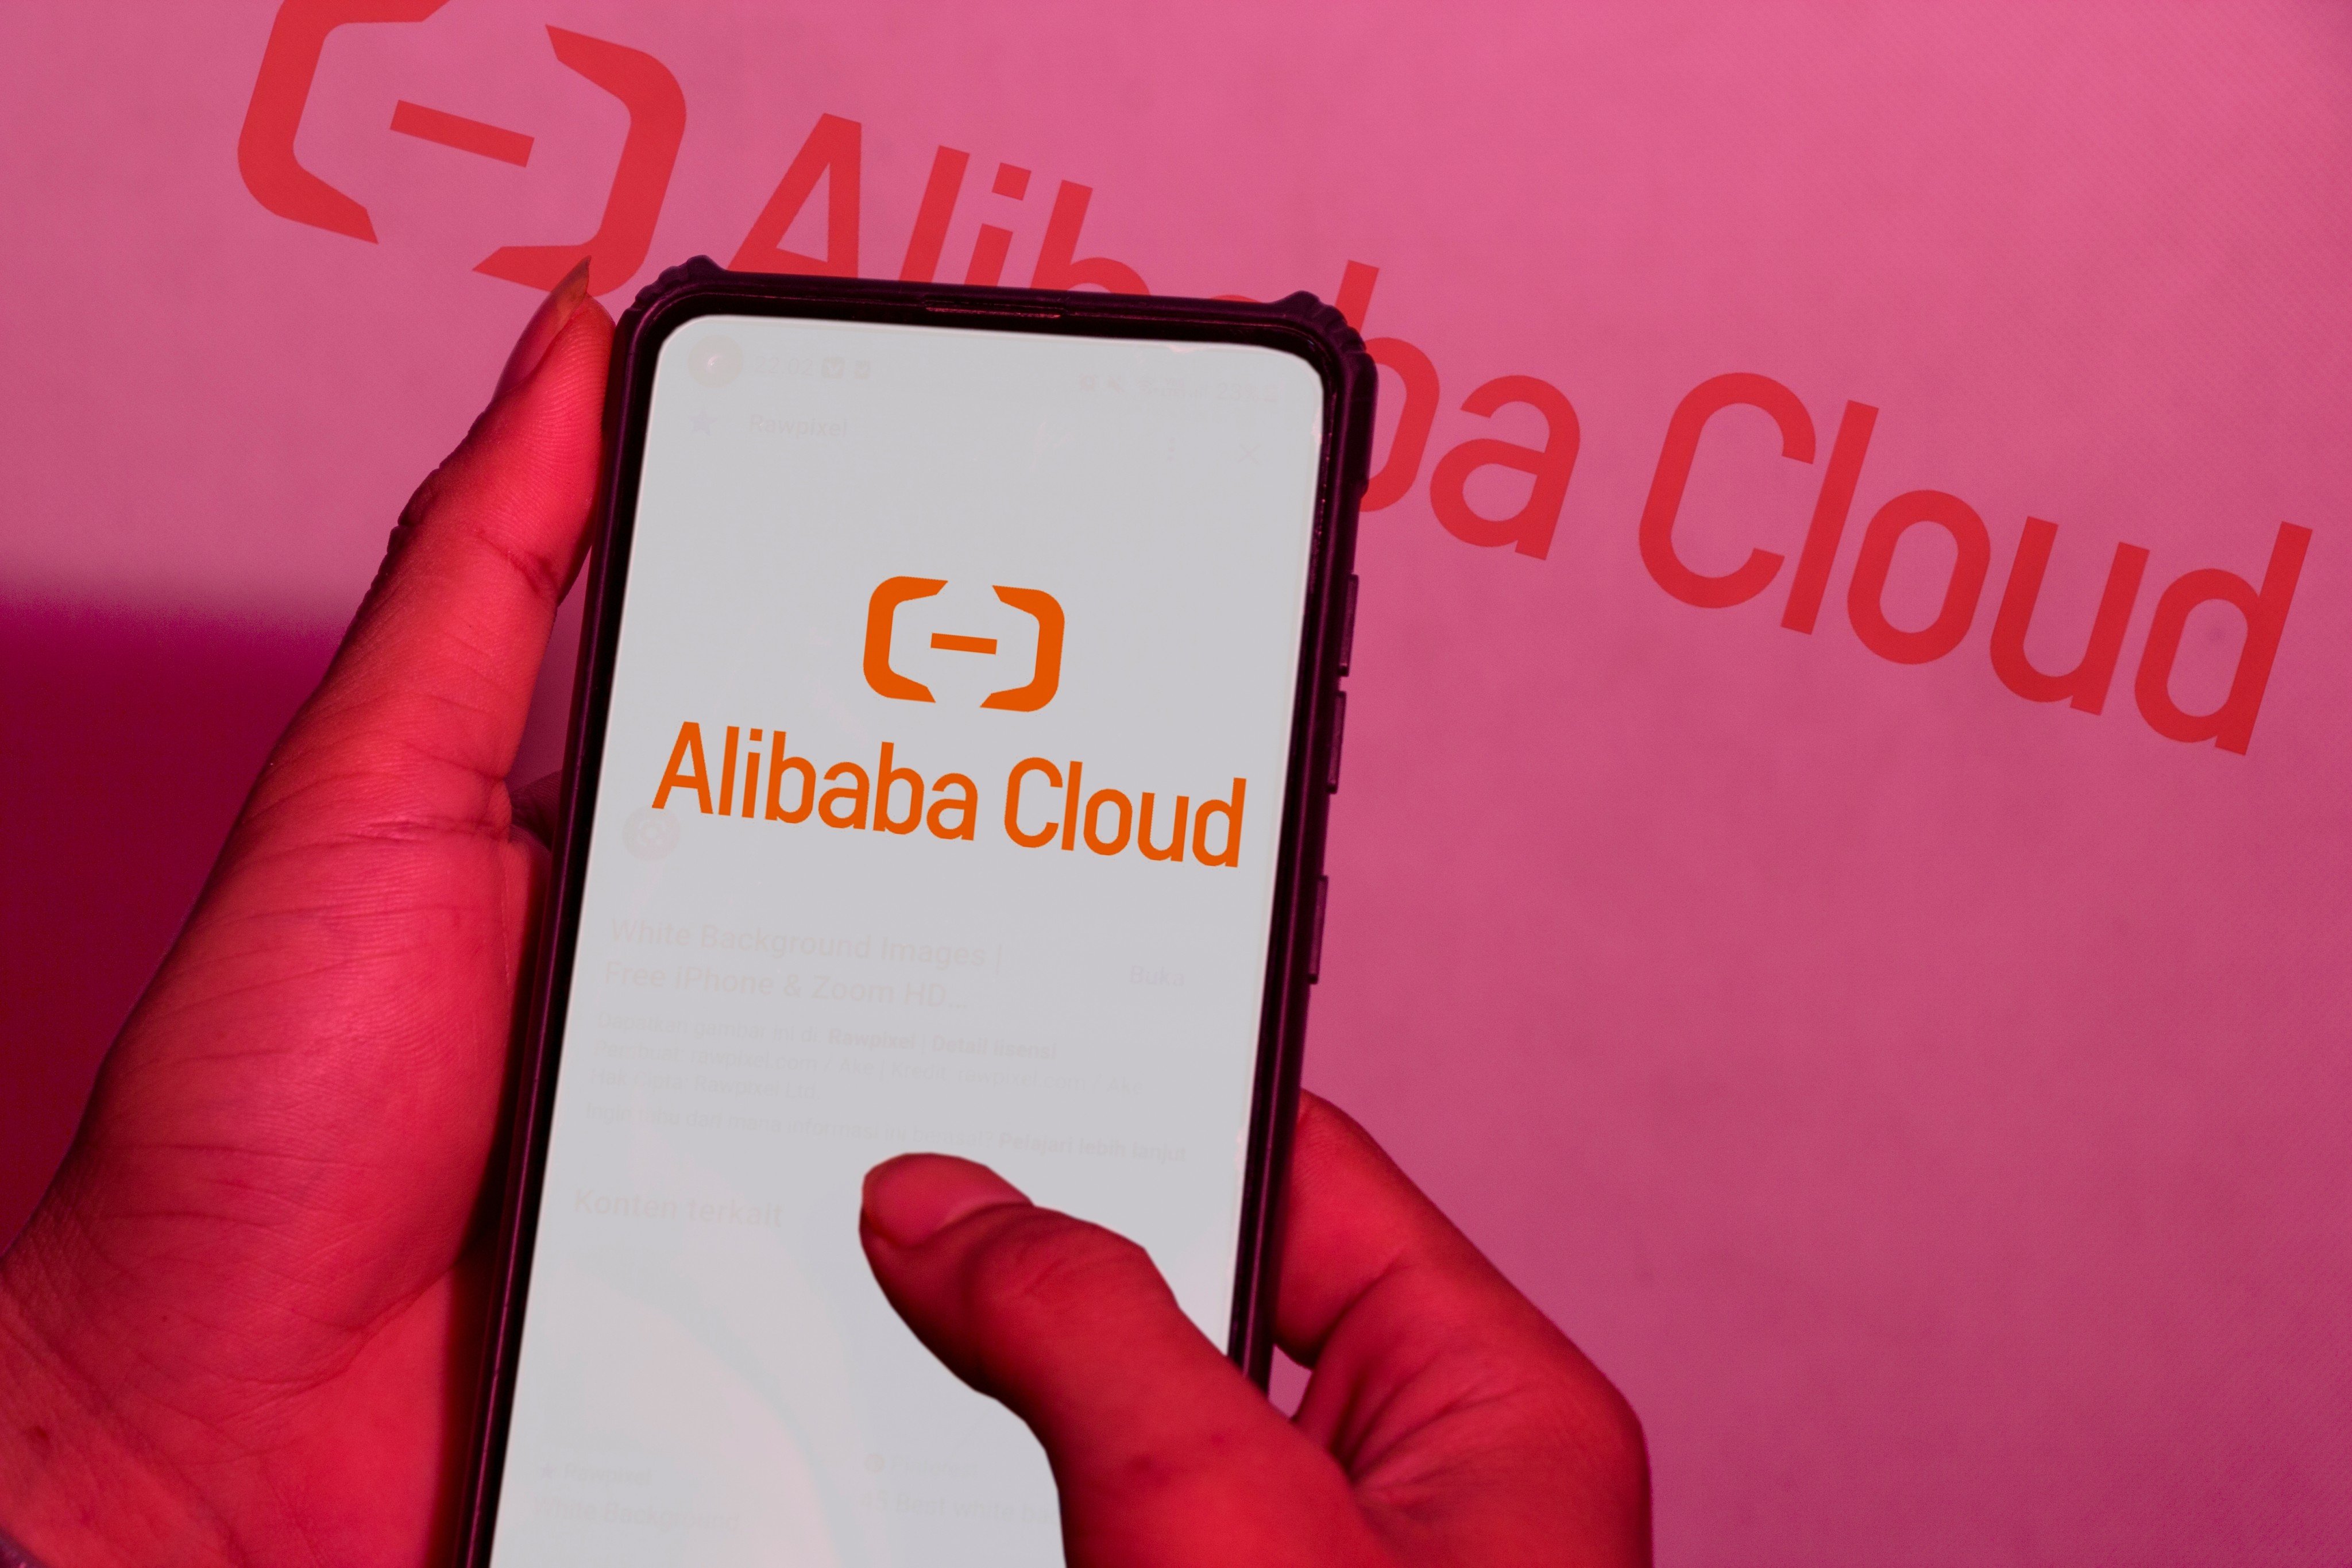 Alibaba Group Holding chairman and chief executive Daniel Zhang Yong said Alibaba Cloud represents “an opportunity of extreme strategic importance” for the e-commerce giant. Photo: Shutterstock